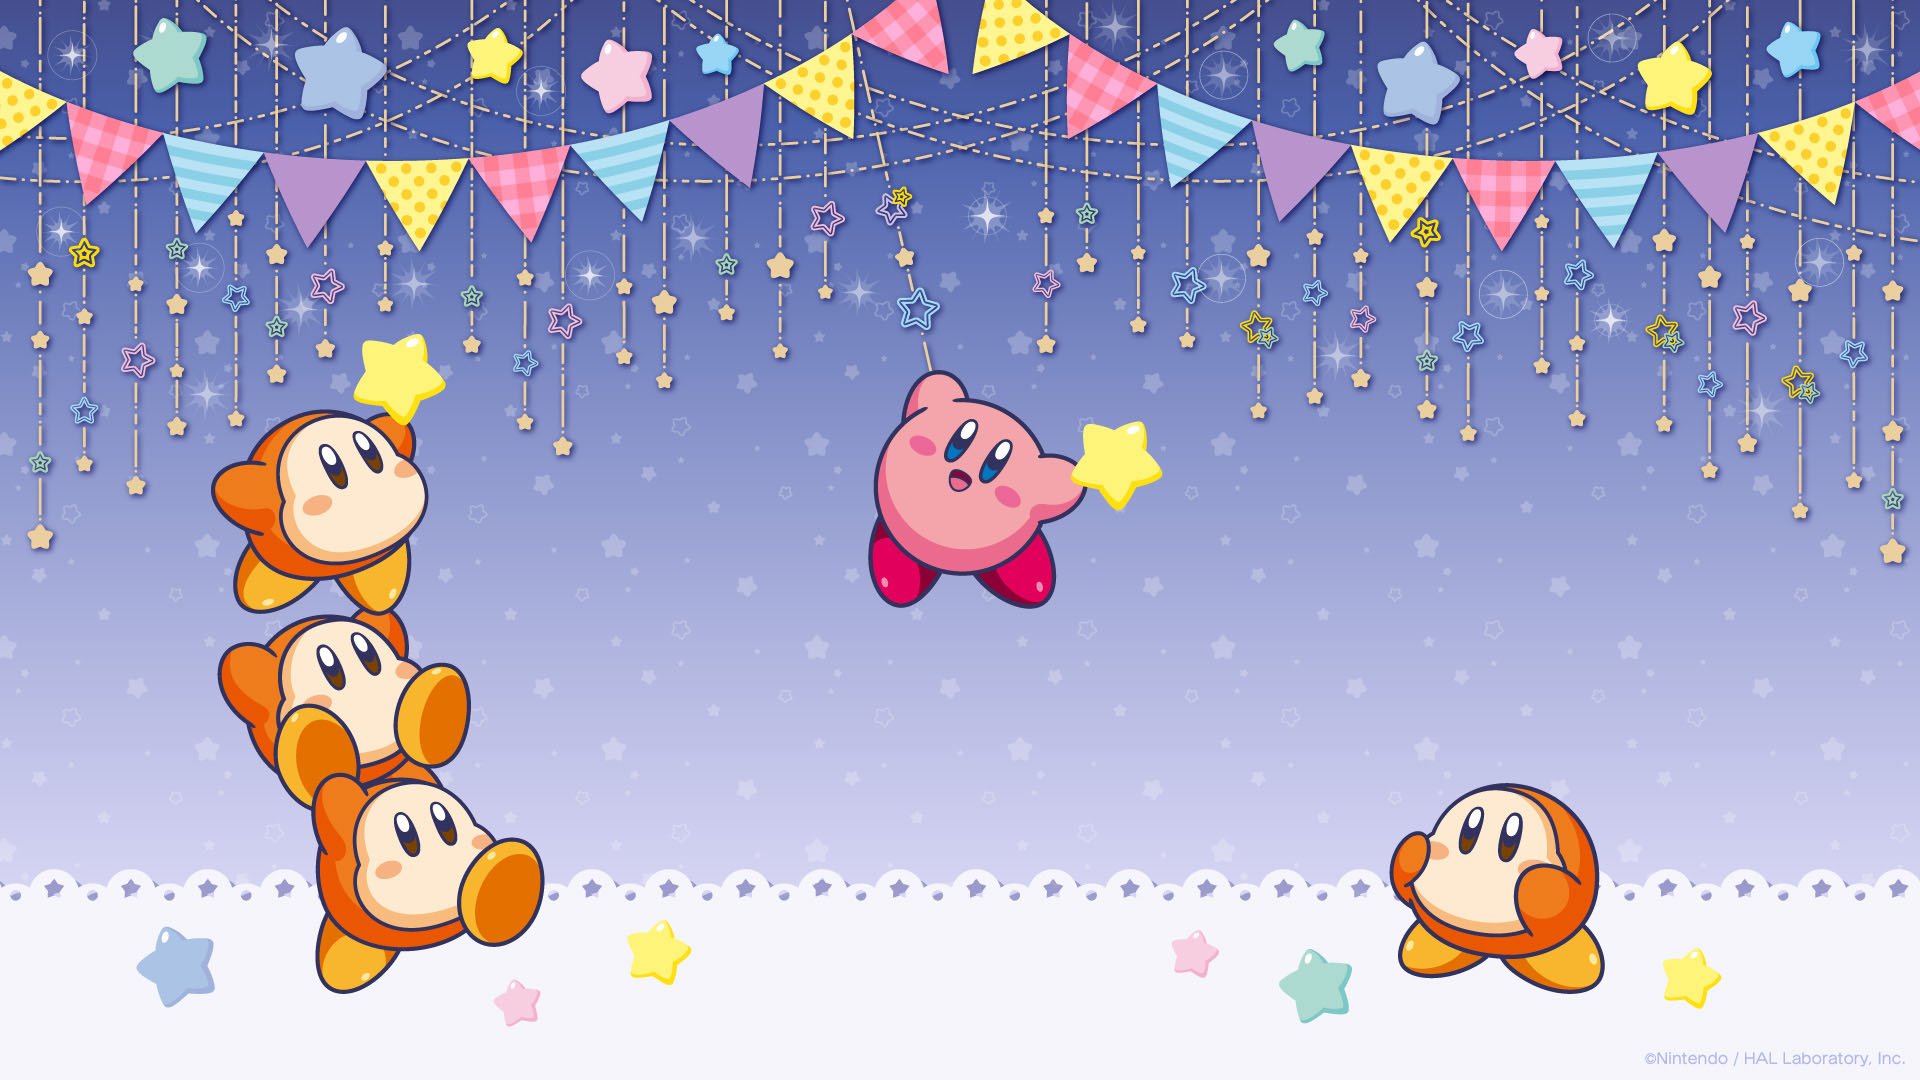 General 1920x1080 Nintendo Kirby video game characters video game art stars video games minimalism simple background